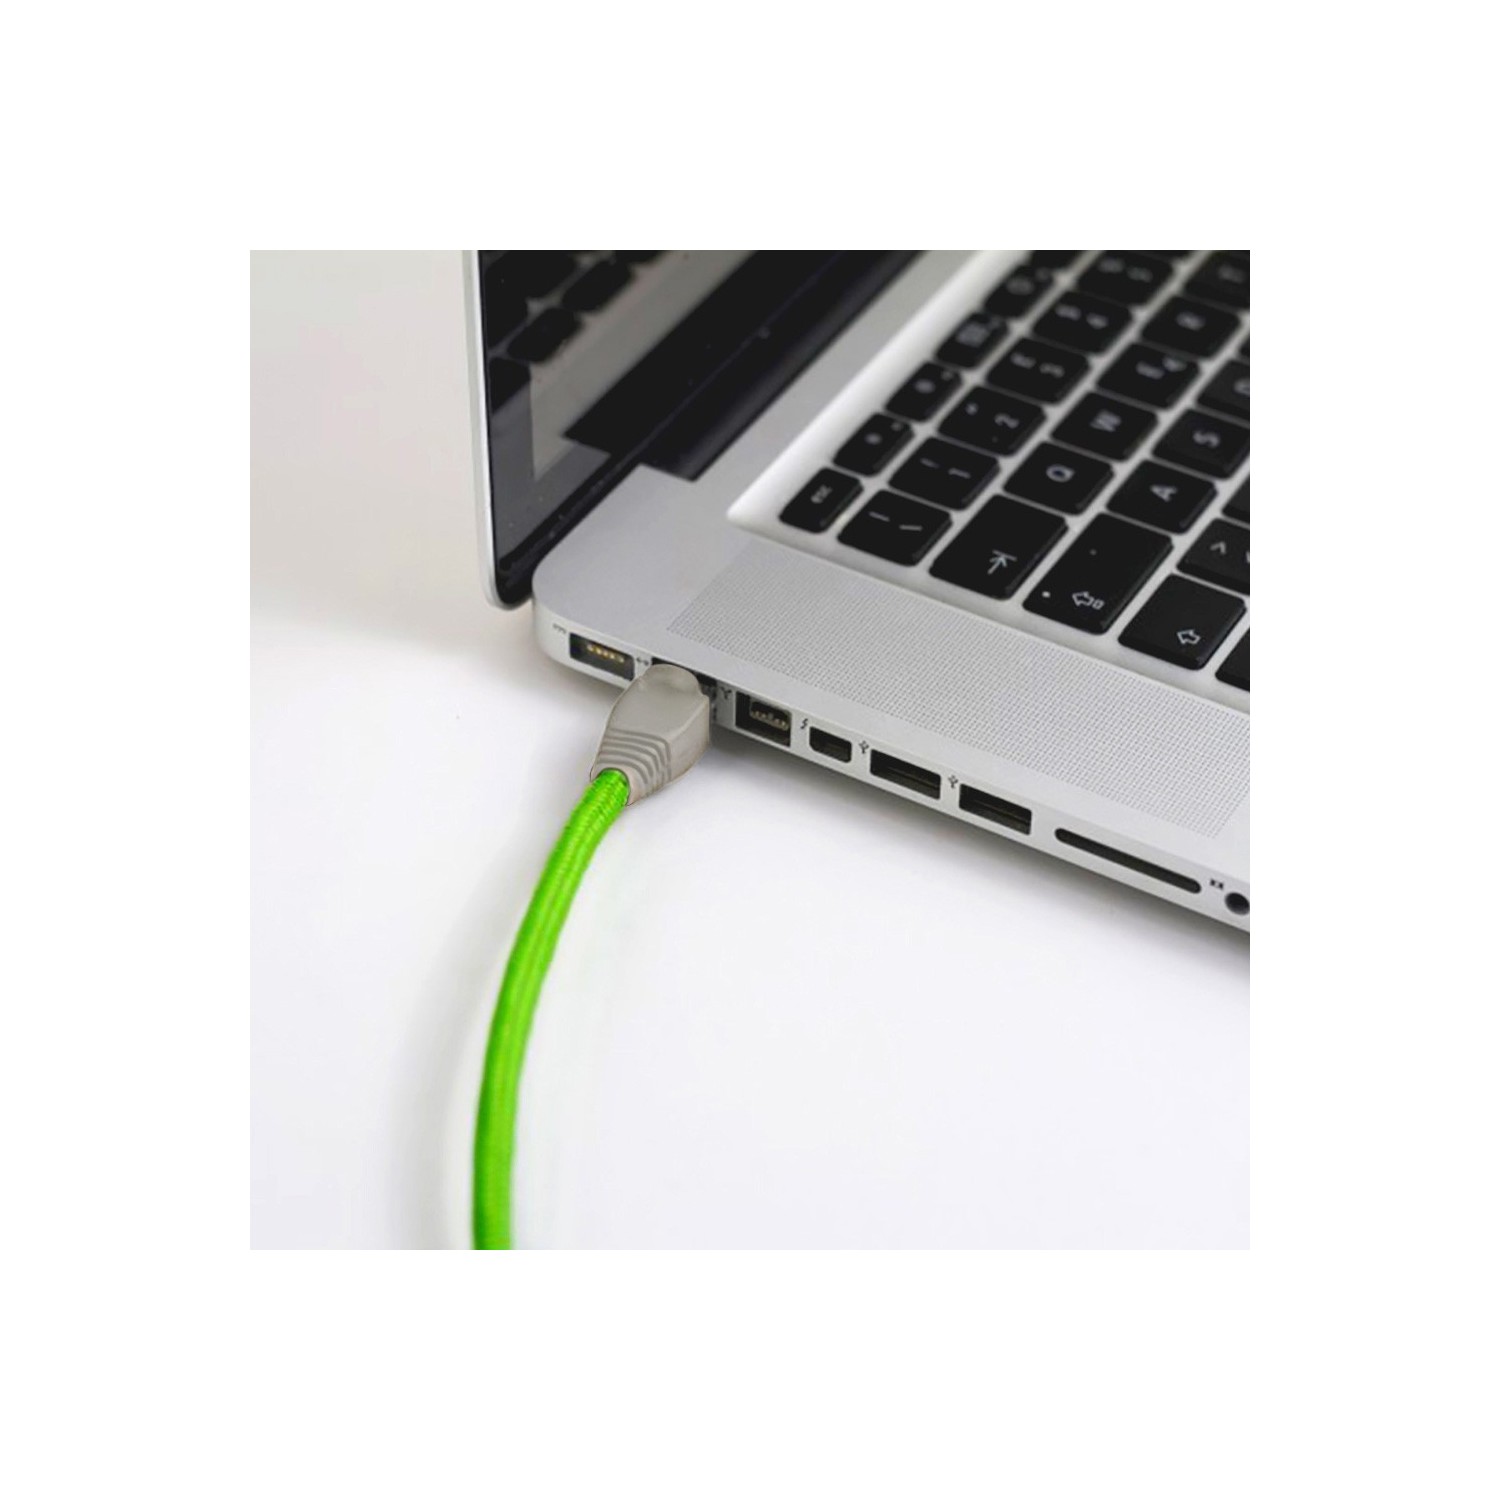 LAN Ethernet Cable Cat 5e without RJ45 plugs - Rayon Fabric RF06 Neon Green